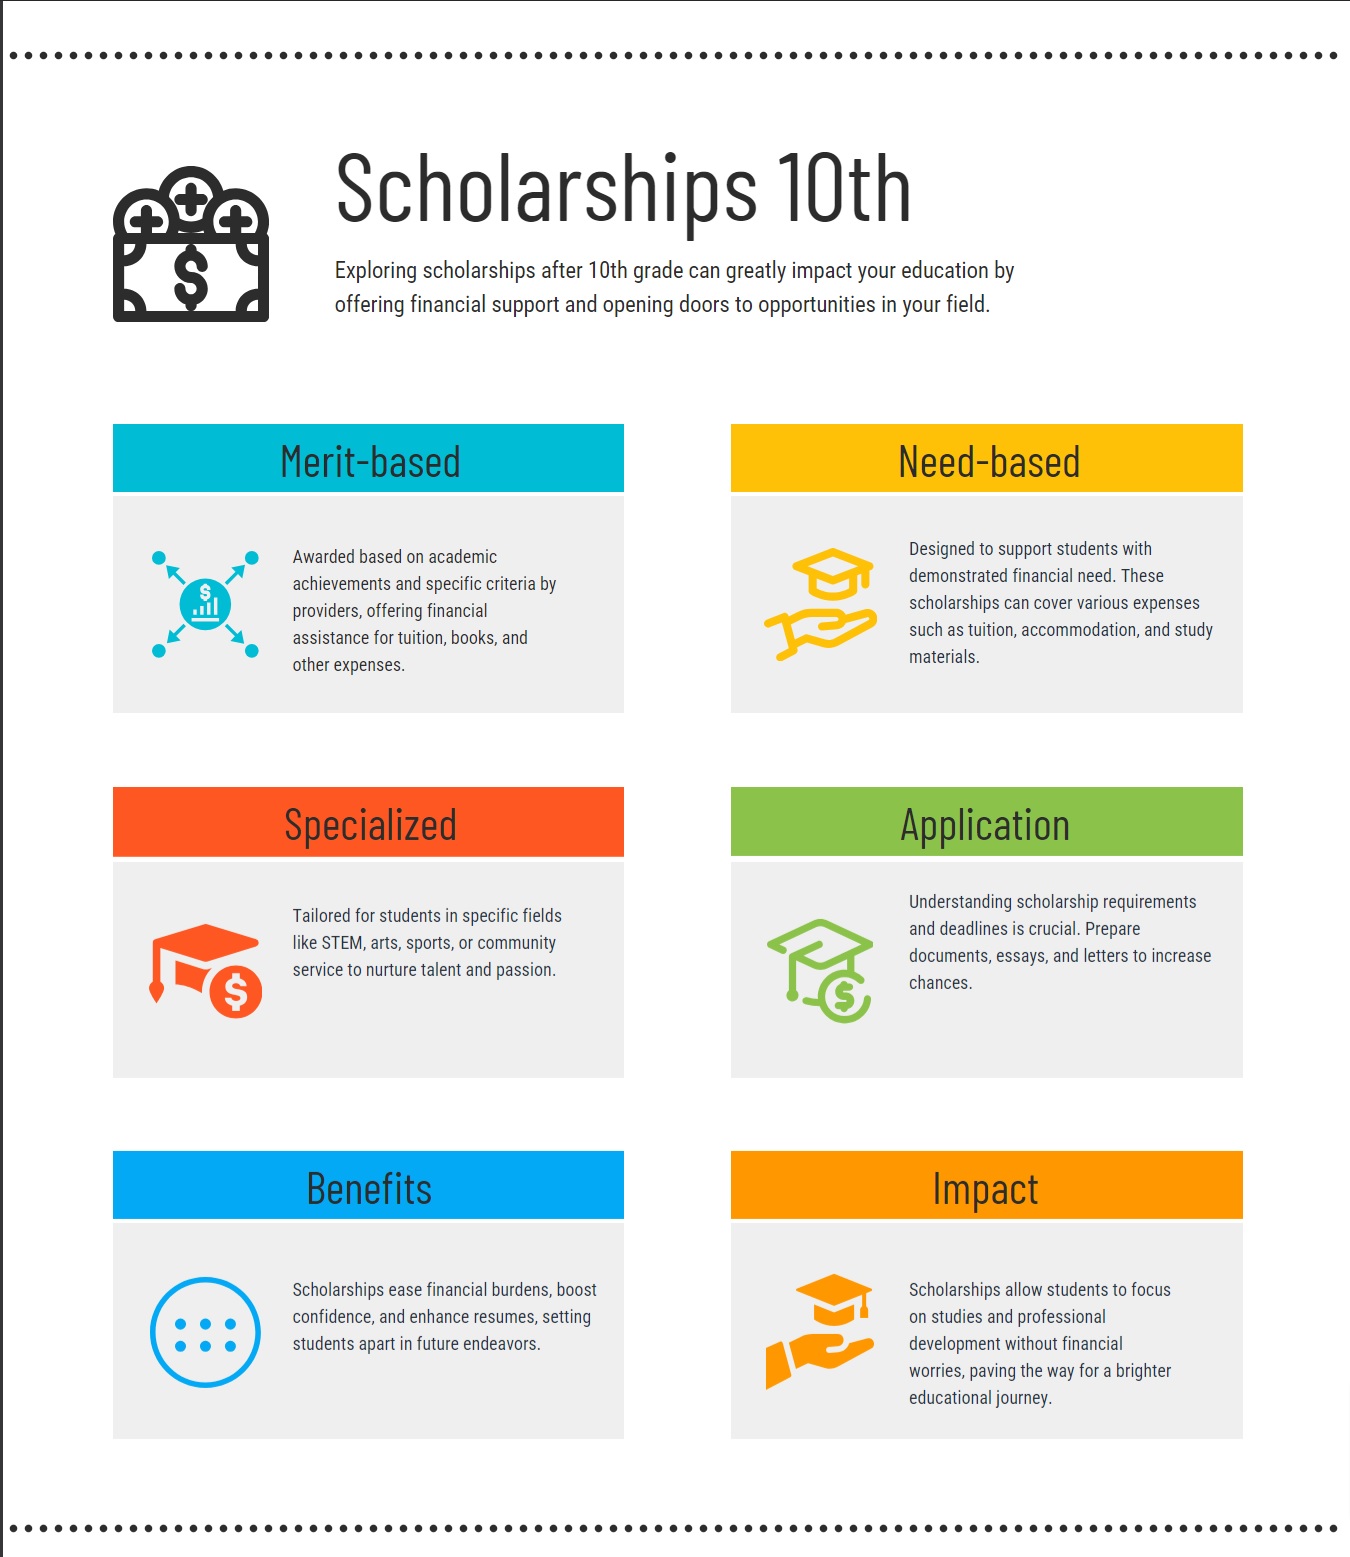 scholarship-after-10th